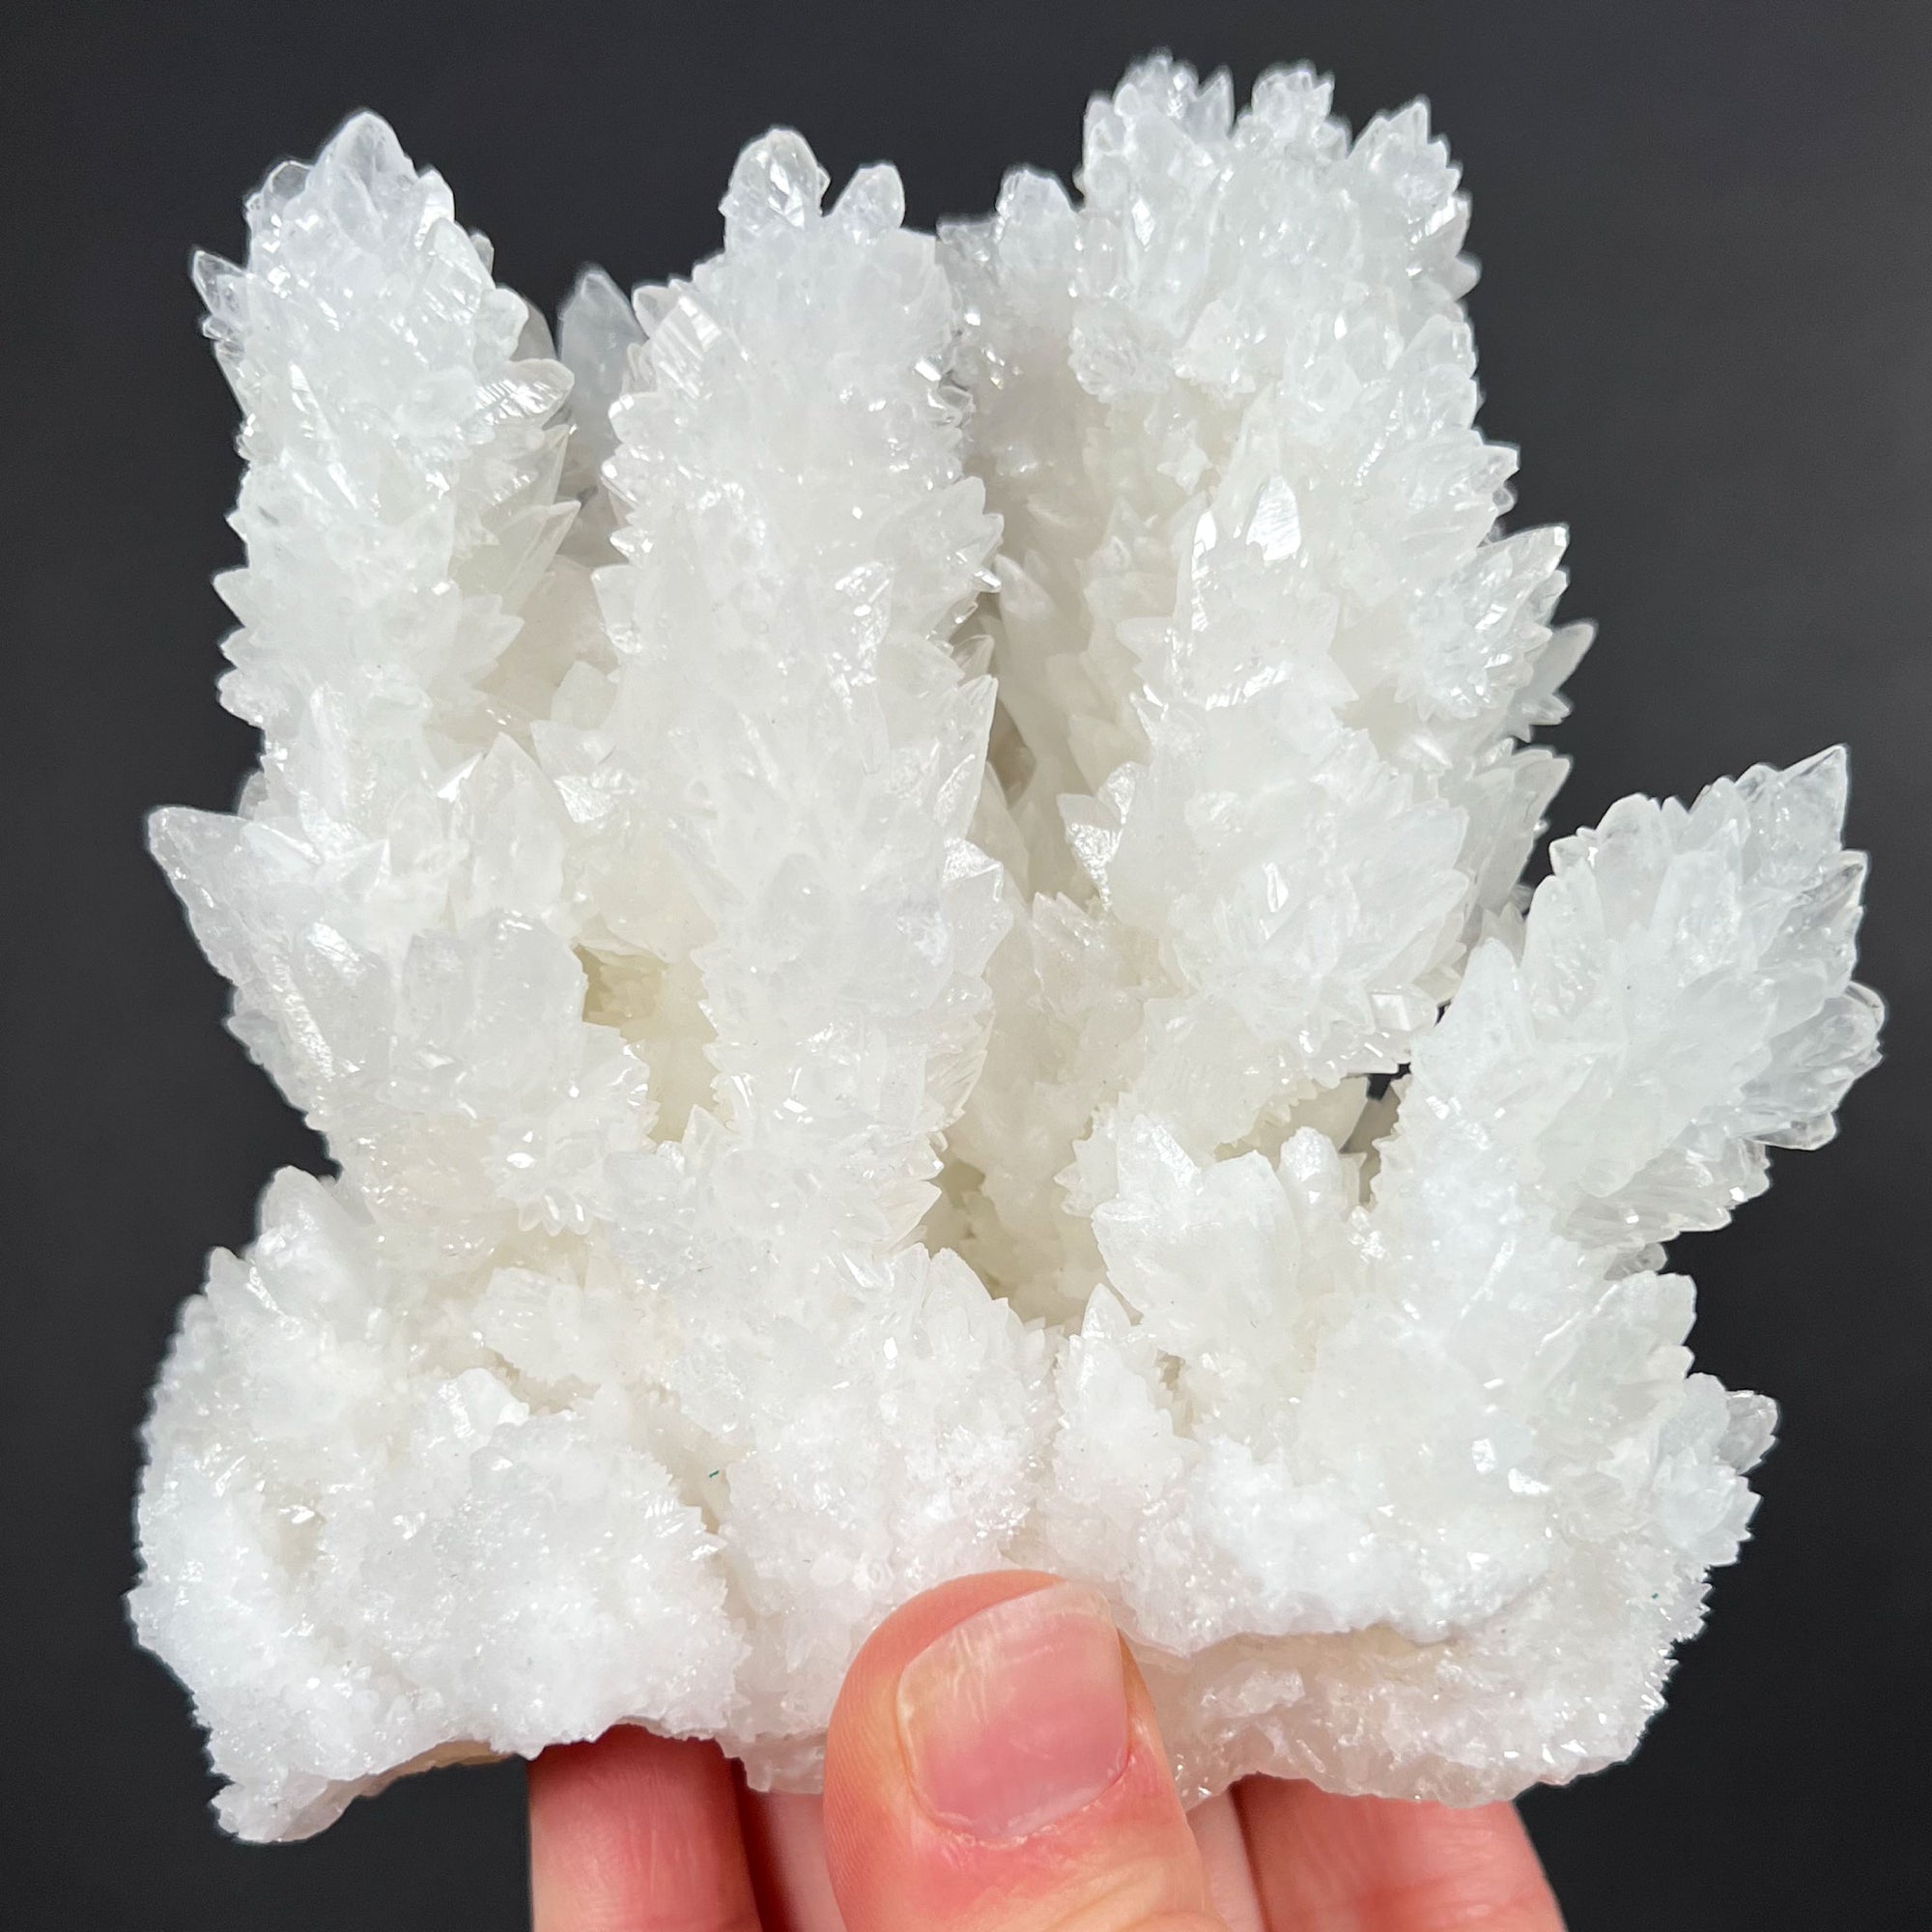 Cave Calcite Aragonite from Mexico